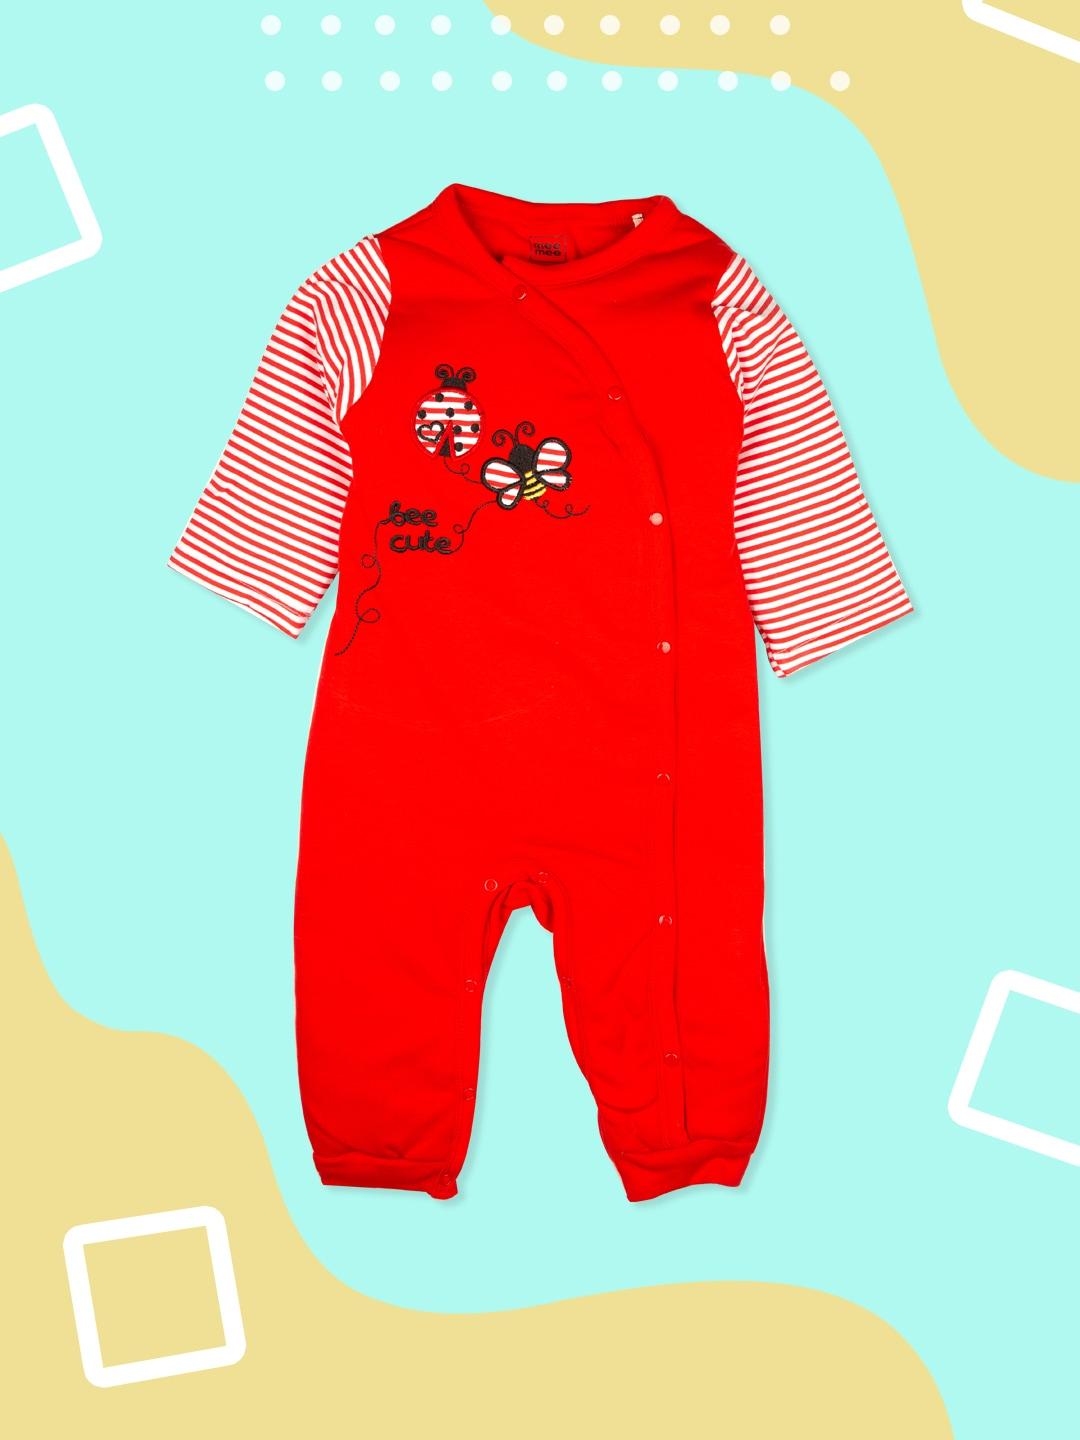 meemee-infants-red-&-white-appliqued-rompers